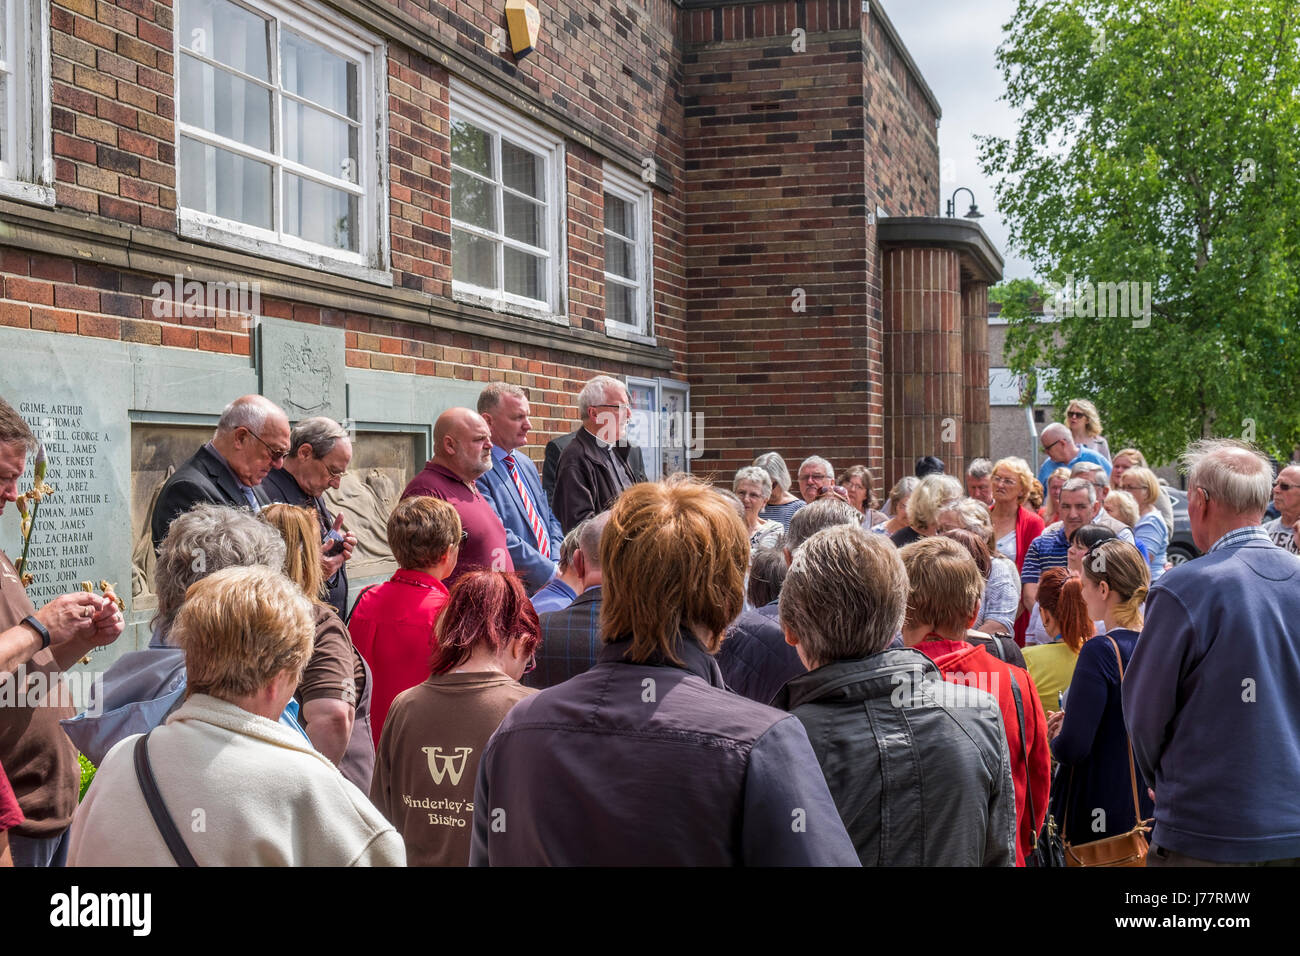 Little Lever, Bolton, England, 24th May 2017. Local priest leads members of the public in prayers for the victims and relatives of the Manchester bombing, local councillors, Sean Hornsby, Rees Gibbon, both Ukip members, Canon Ian Anthony. Members of the public, Local priest and UKIP councillors assemble to lead the general public in prayers for the family and victims of the recent Islamic State group bombing in the center of Manchester. Mike Hesp/ Alamy Live News. Stock Photo